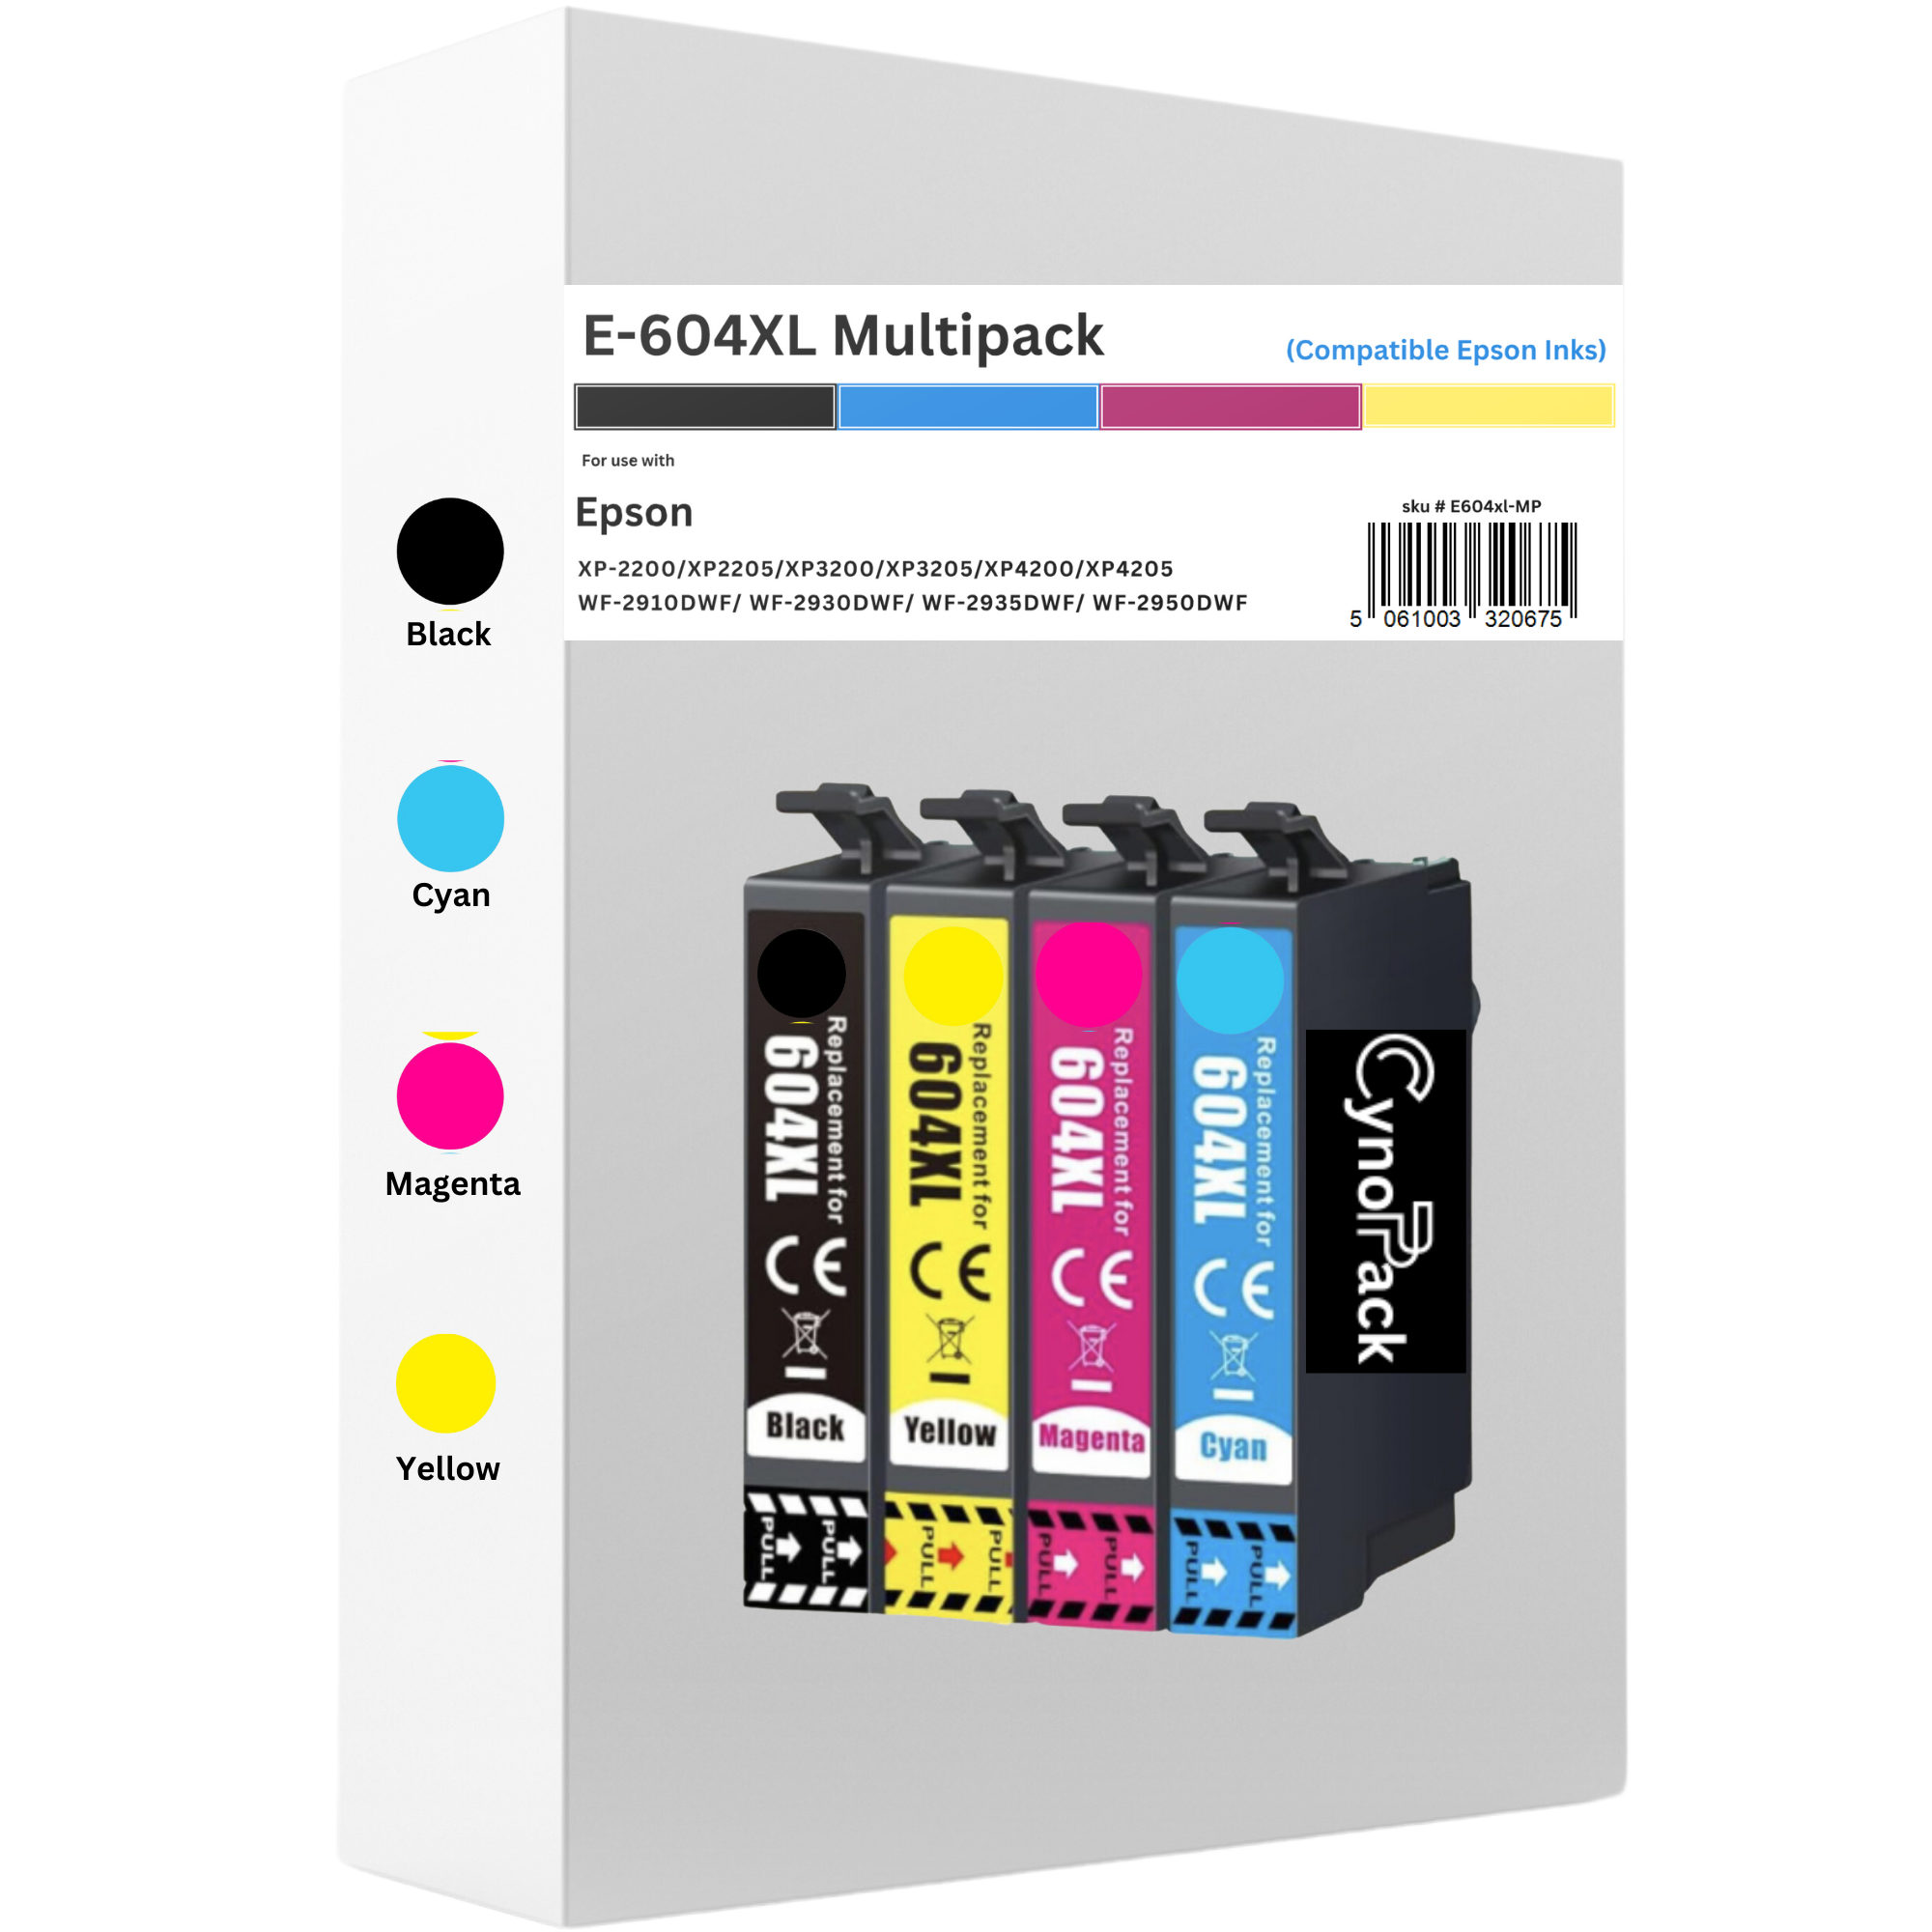 Compatible Epson 604xl Inks